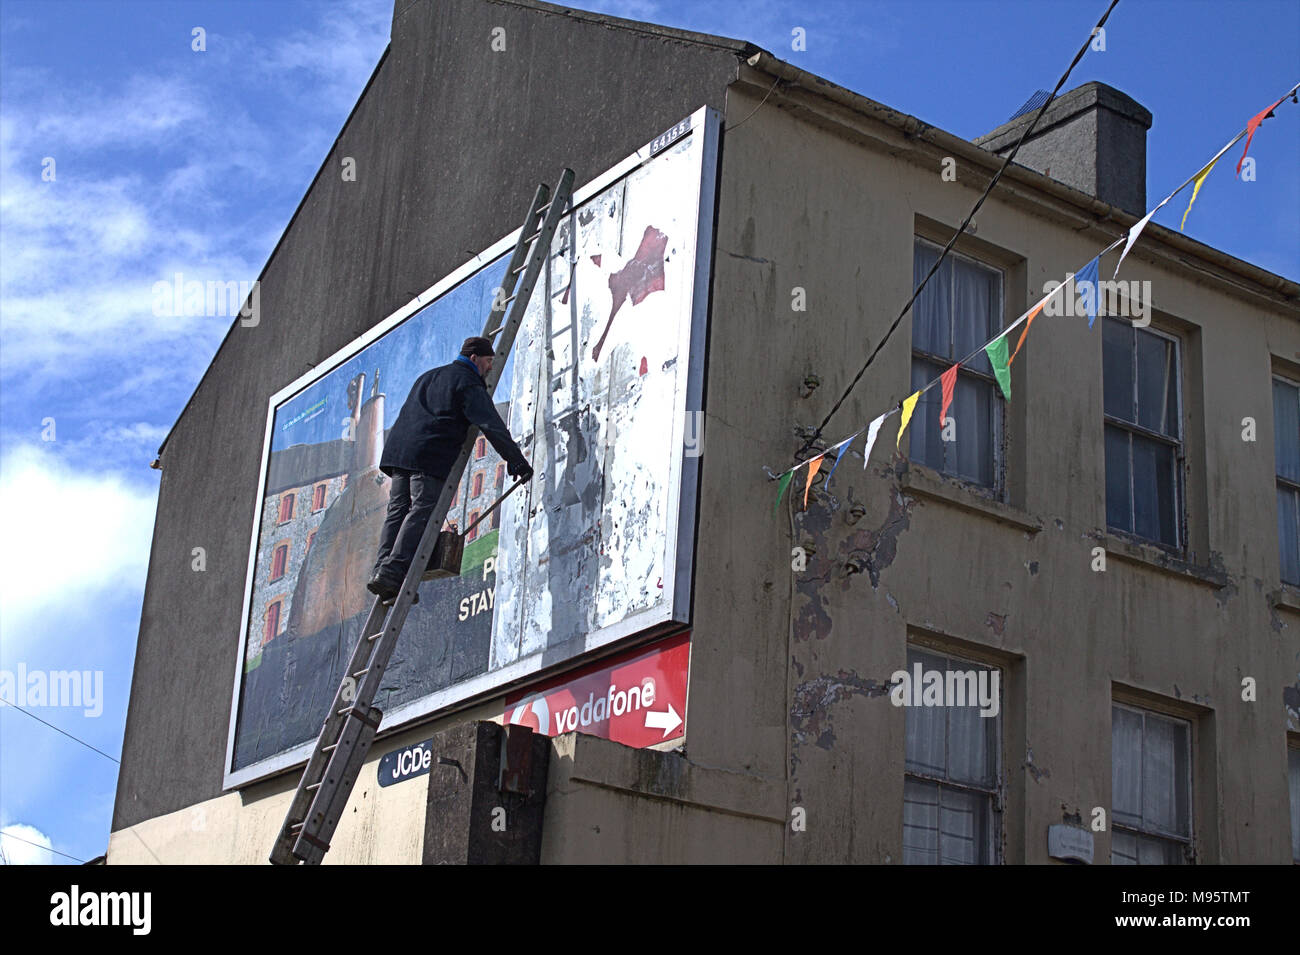 man up a ladder putting up a new advertising hoarding, billboard for jamesons whisky a famous irish whisky. skibbereen, ireland Stock Photo